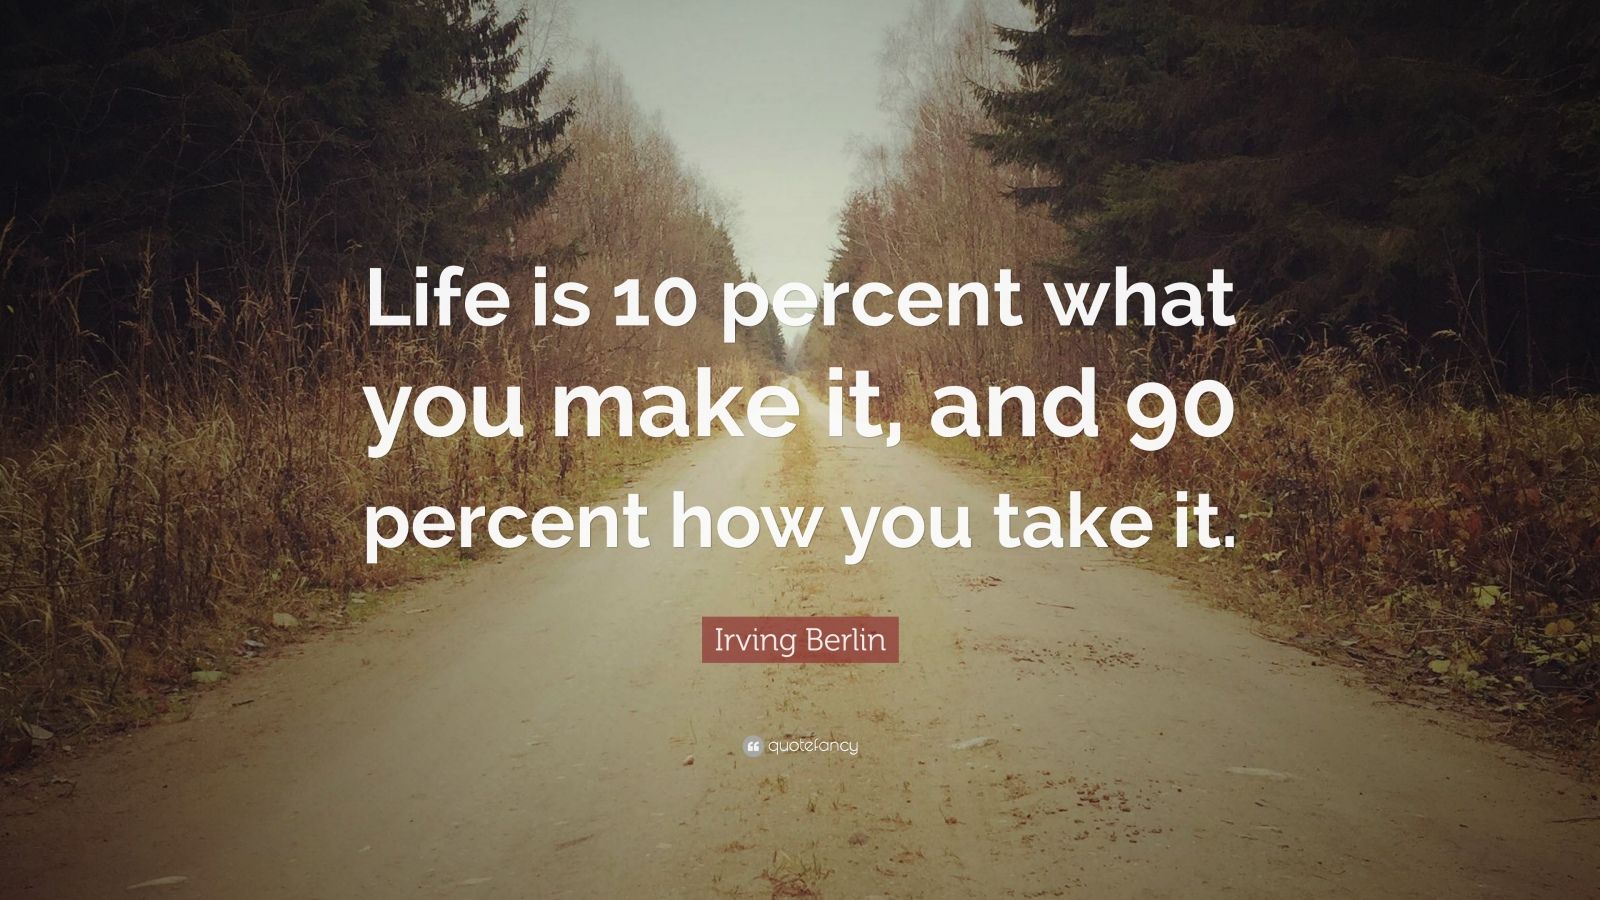 quote life is 10 percent what happens to you